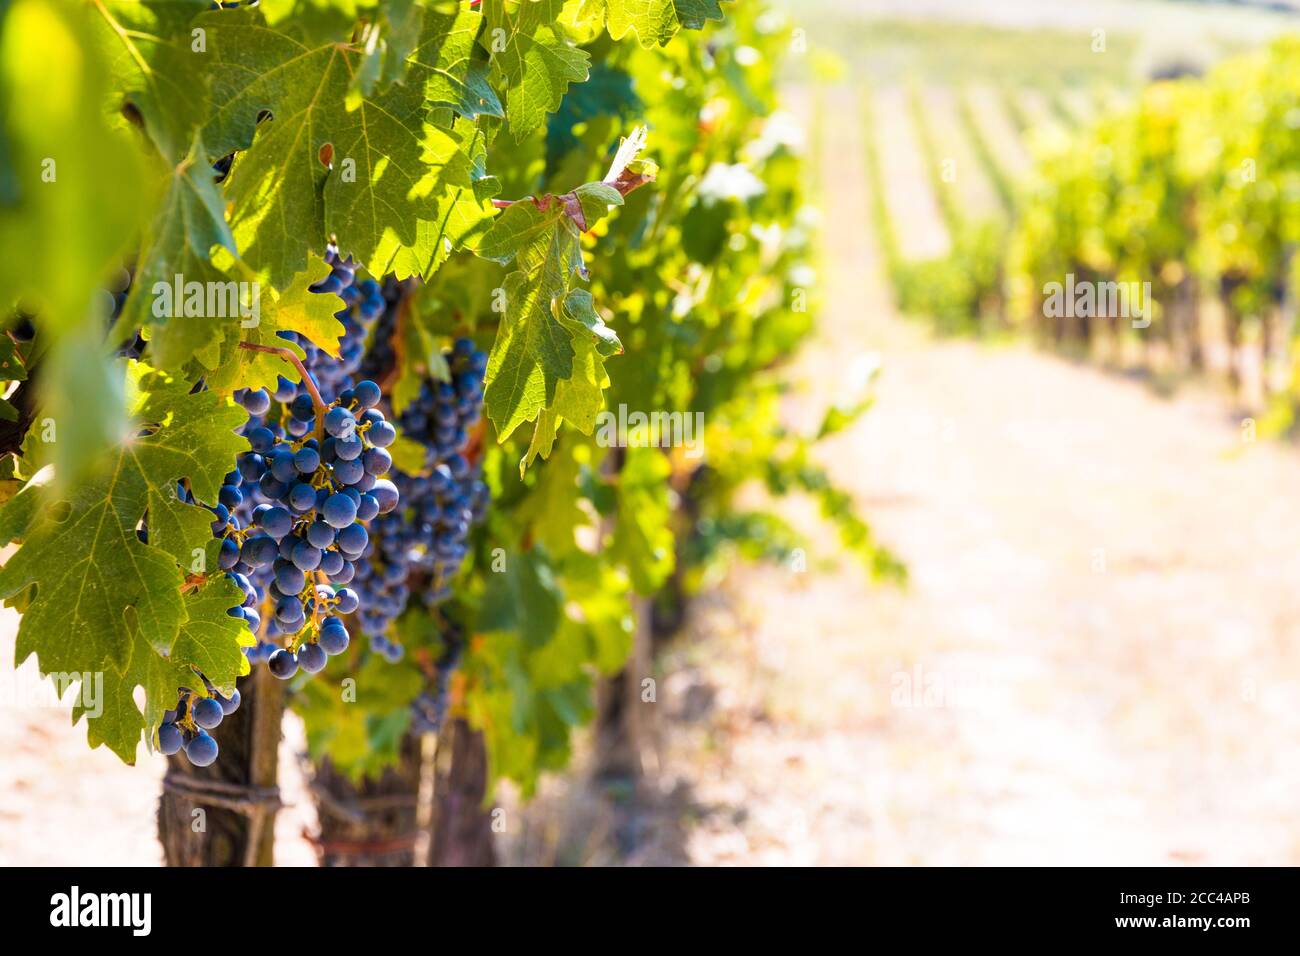 Gorgeous close-up view of hanging purple Sangiovese grapes (Vitis vinifera) growing in rows with a vineyard in the background. Photographed in a... Stock Photo